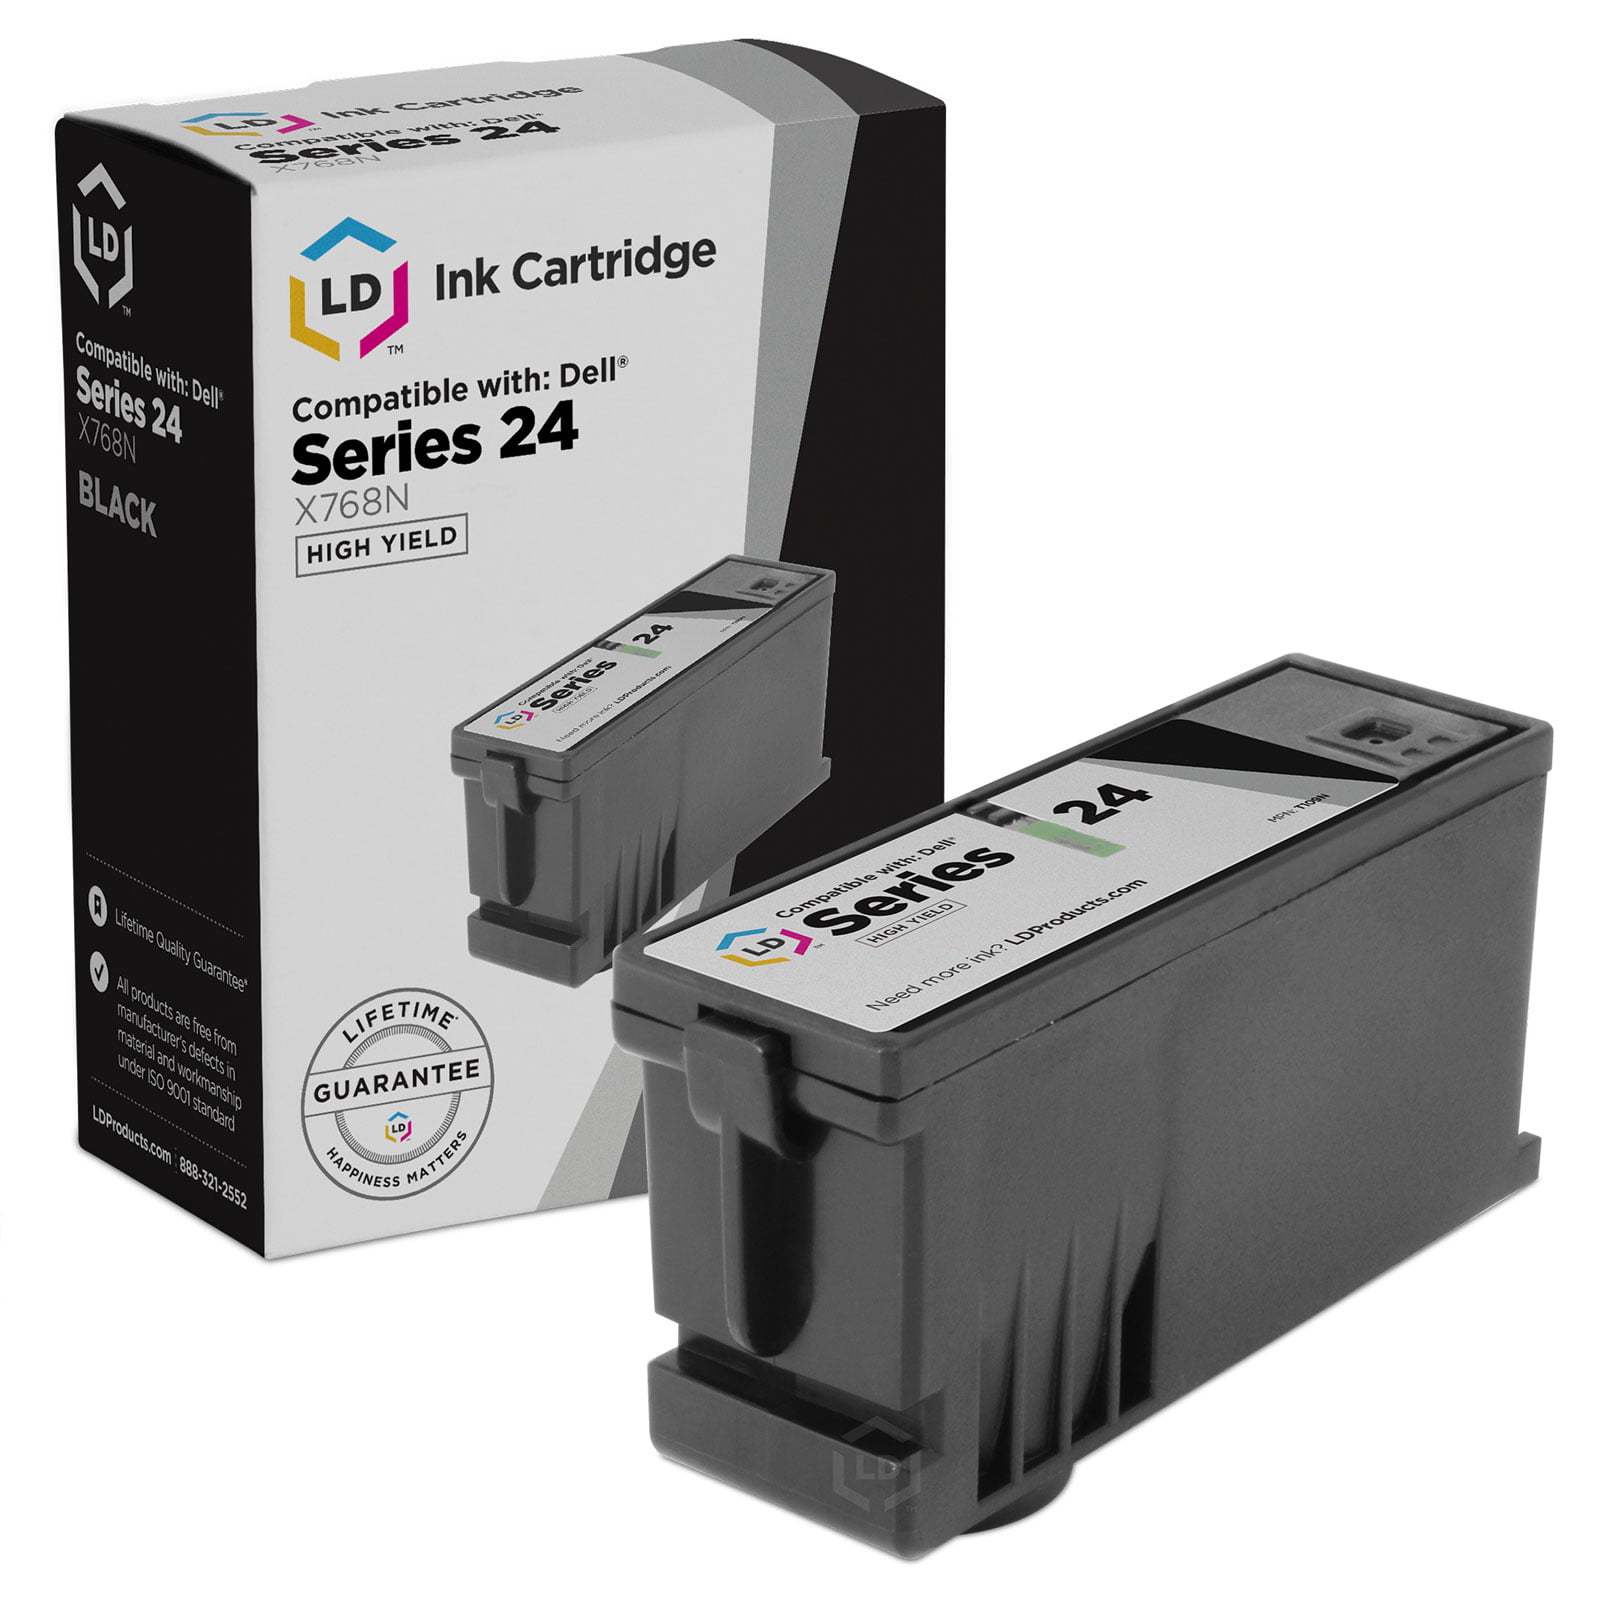 LD Compatible Ink Cartridge Replacement for Dell Series 24 High Yield 2 Black, 1 Color, 3-Pack 